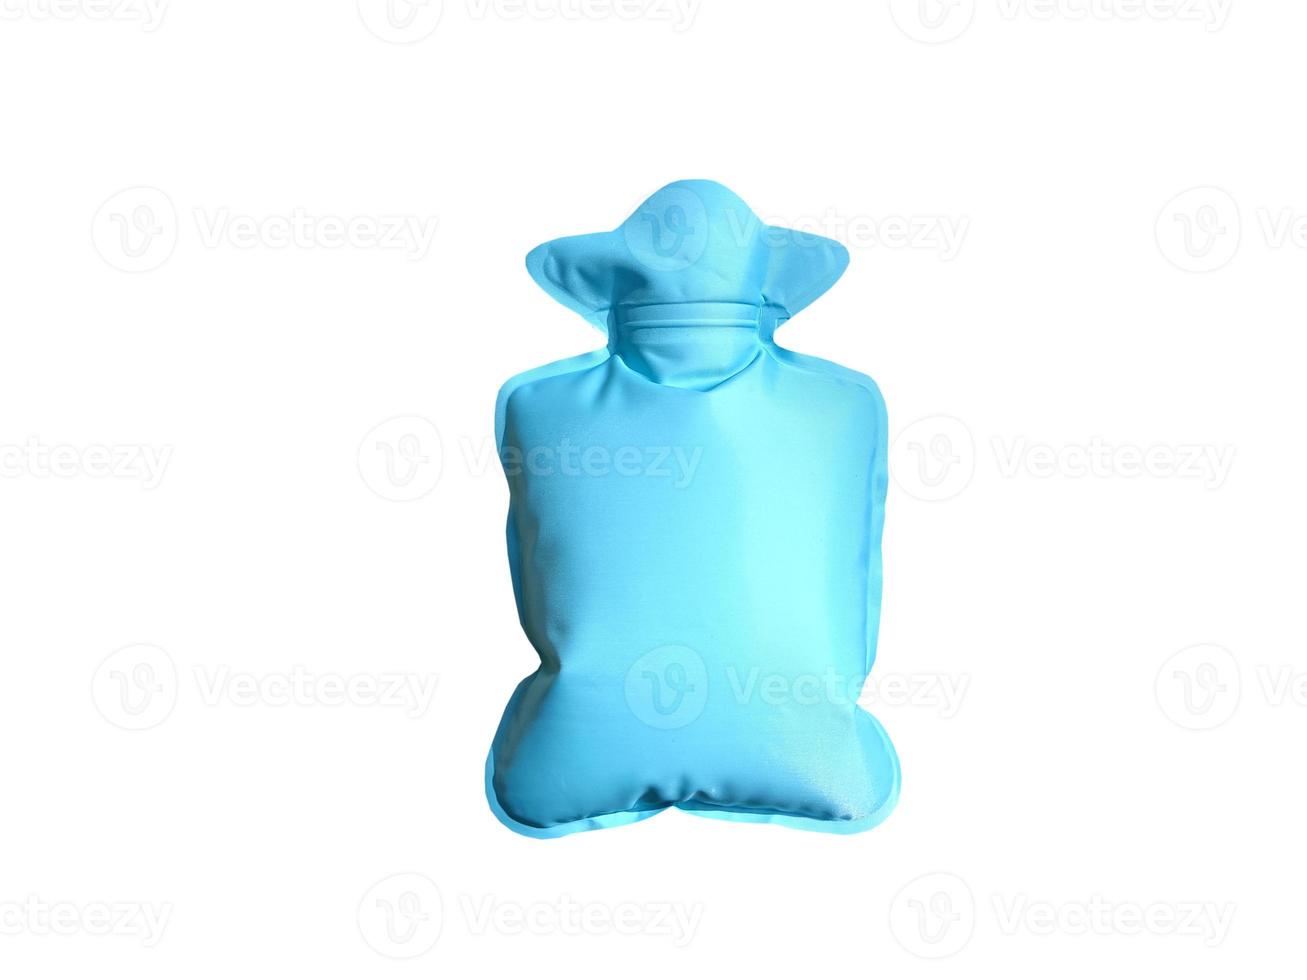 green or mint hot water bottle or bag for relieving menstrual pain with copy space, Isolate on white background photo